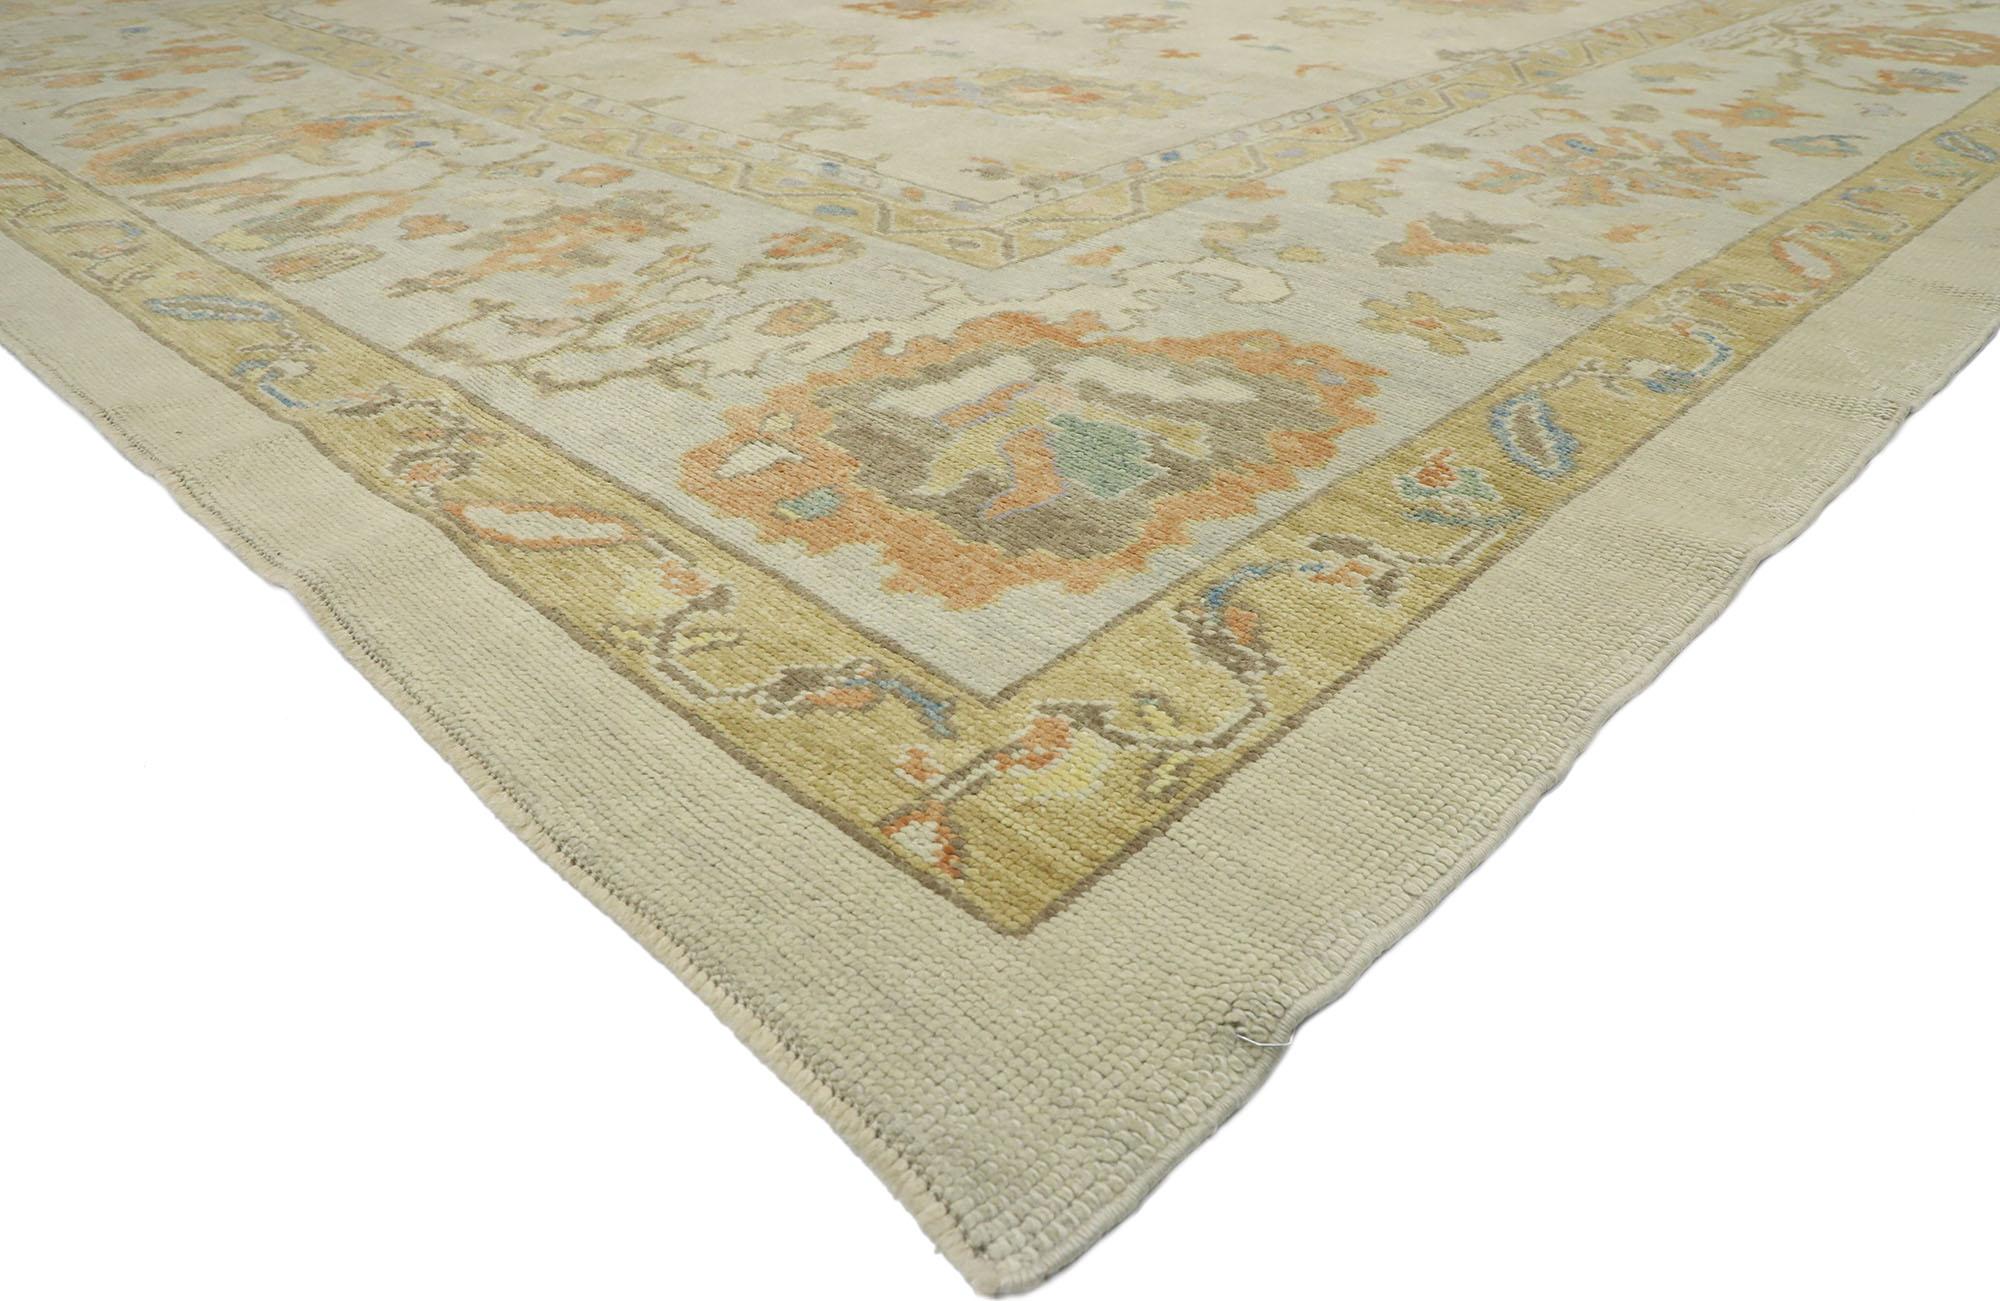 52734, new contemporary Turkish Oushak rug with Transitional style. Blending elements from the modern world with light and airy colors, this hand knotted wool contemporary Turkish Oushak style area rug will boost the coziness factor in nearly any